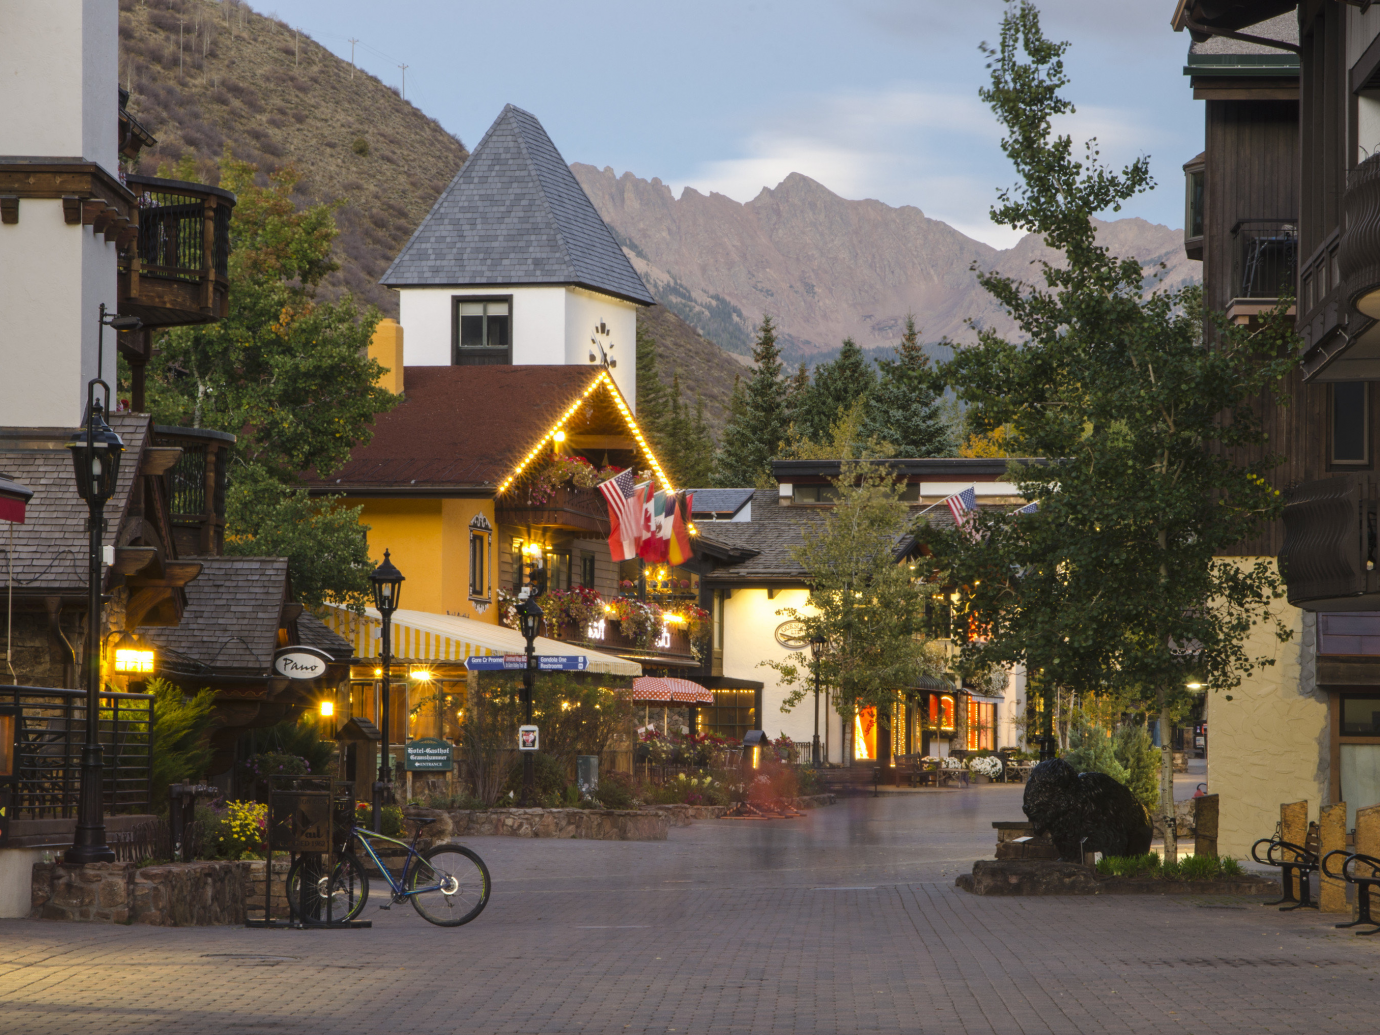 Cute neighborhood with an old timey feel in Vail, Colorado